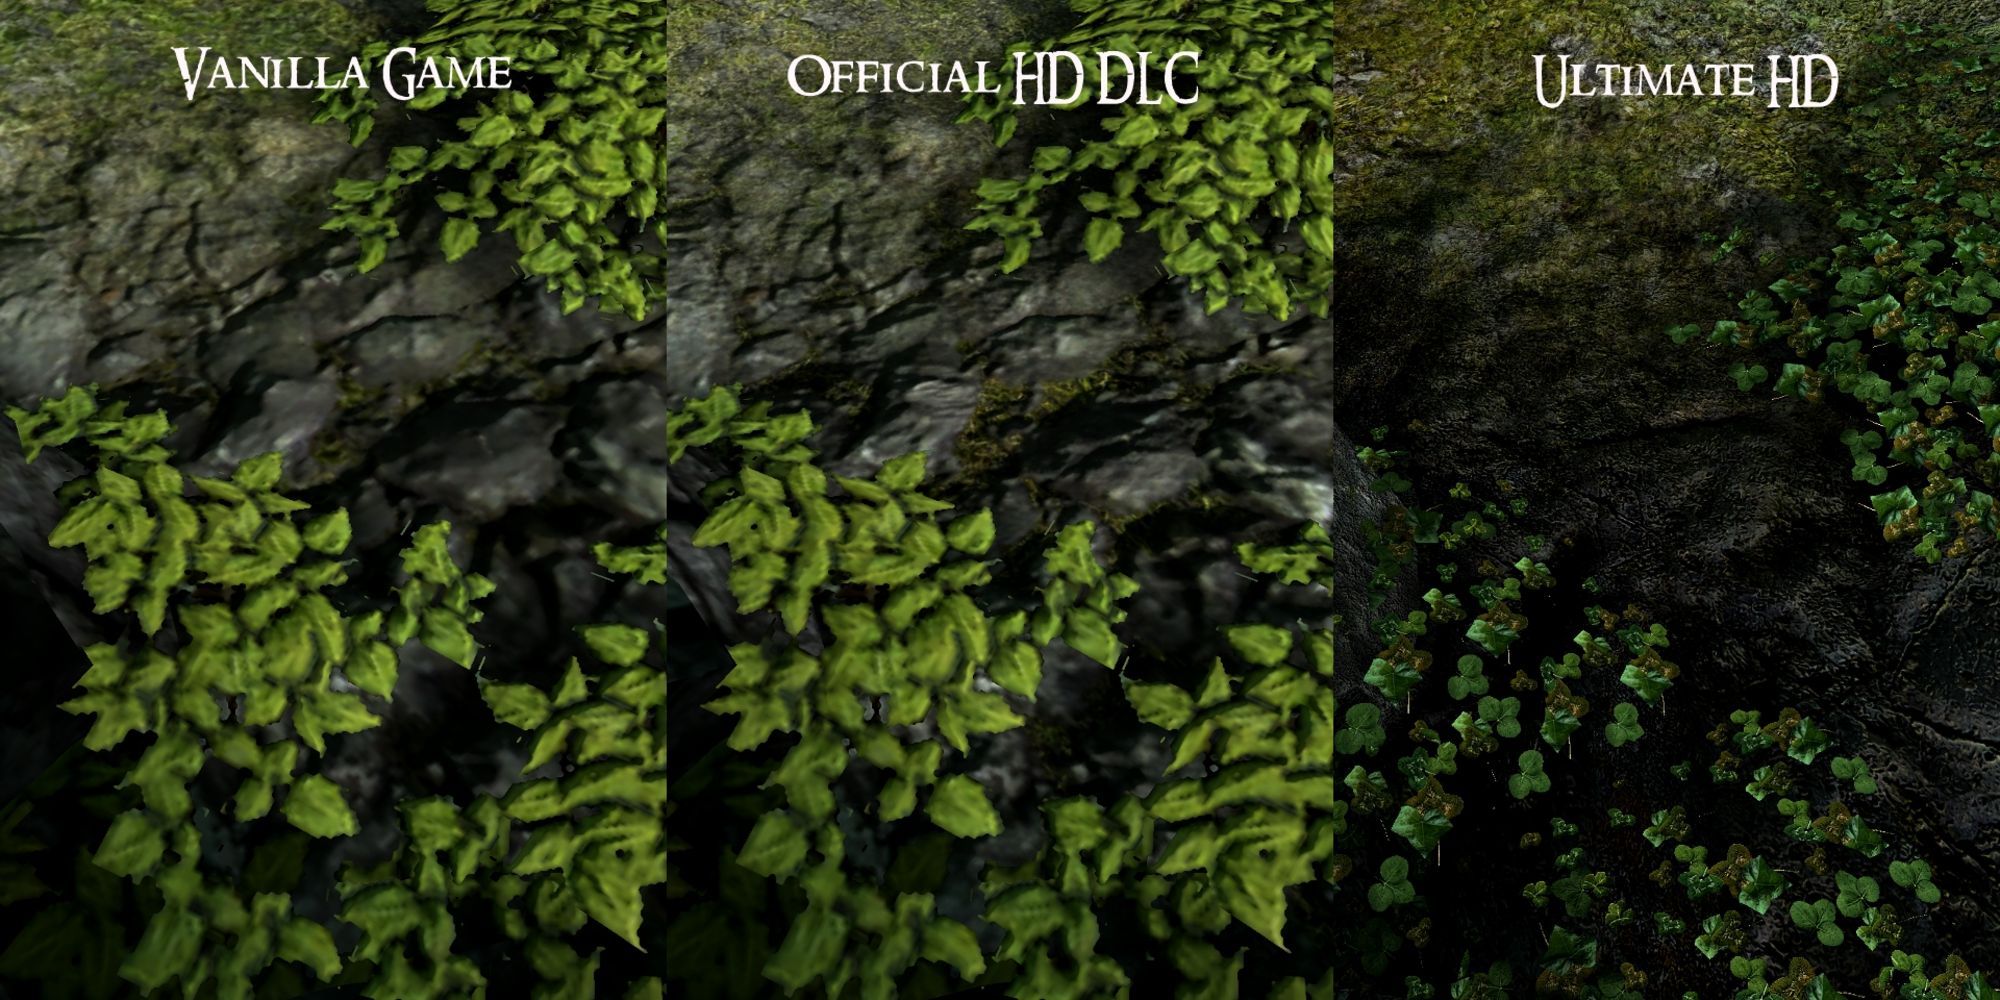 dragon age 2 Ultimate HD mod greenery textures